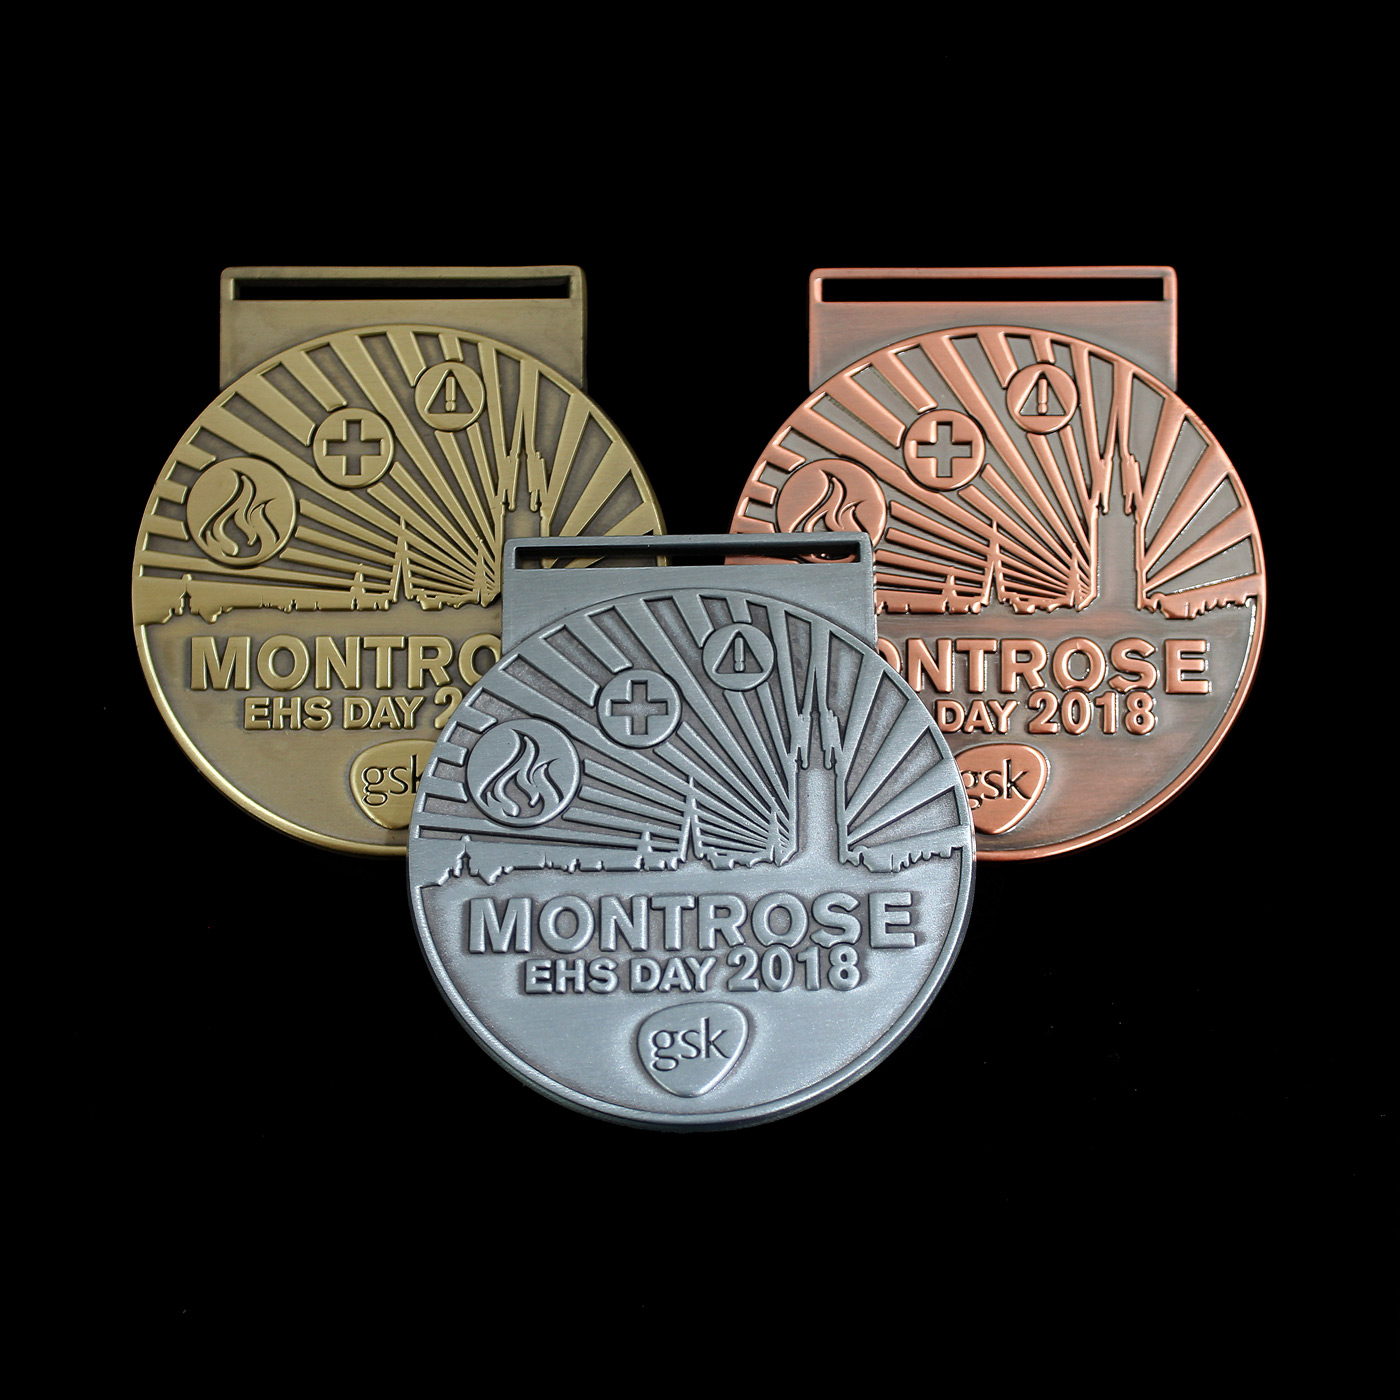 GlaxoSmithKline, Montrose Environmental Health and Safety Day Medals 2018